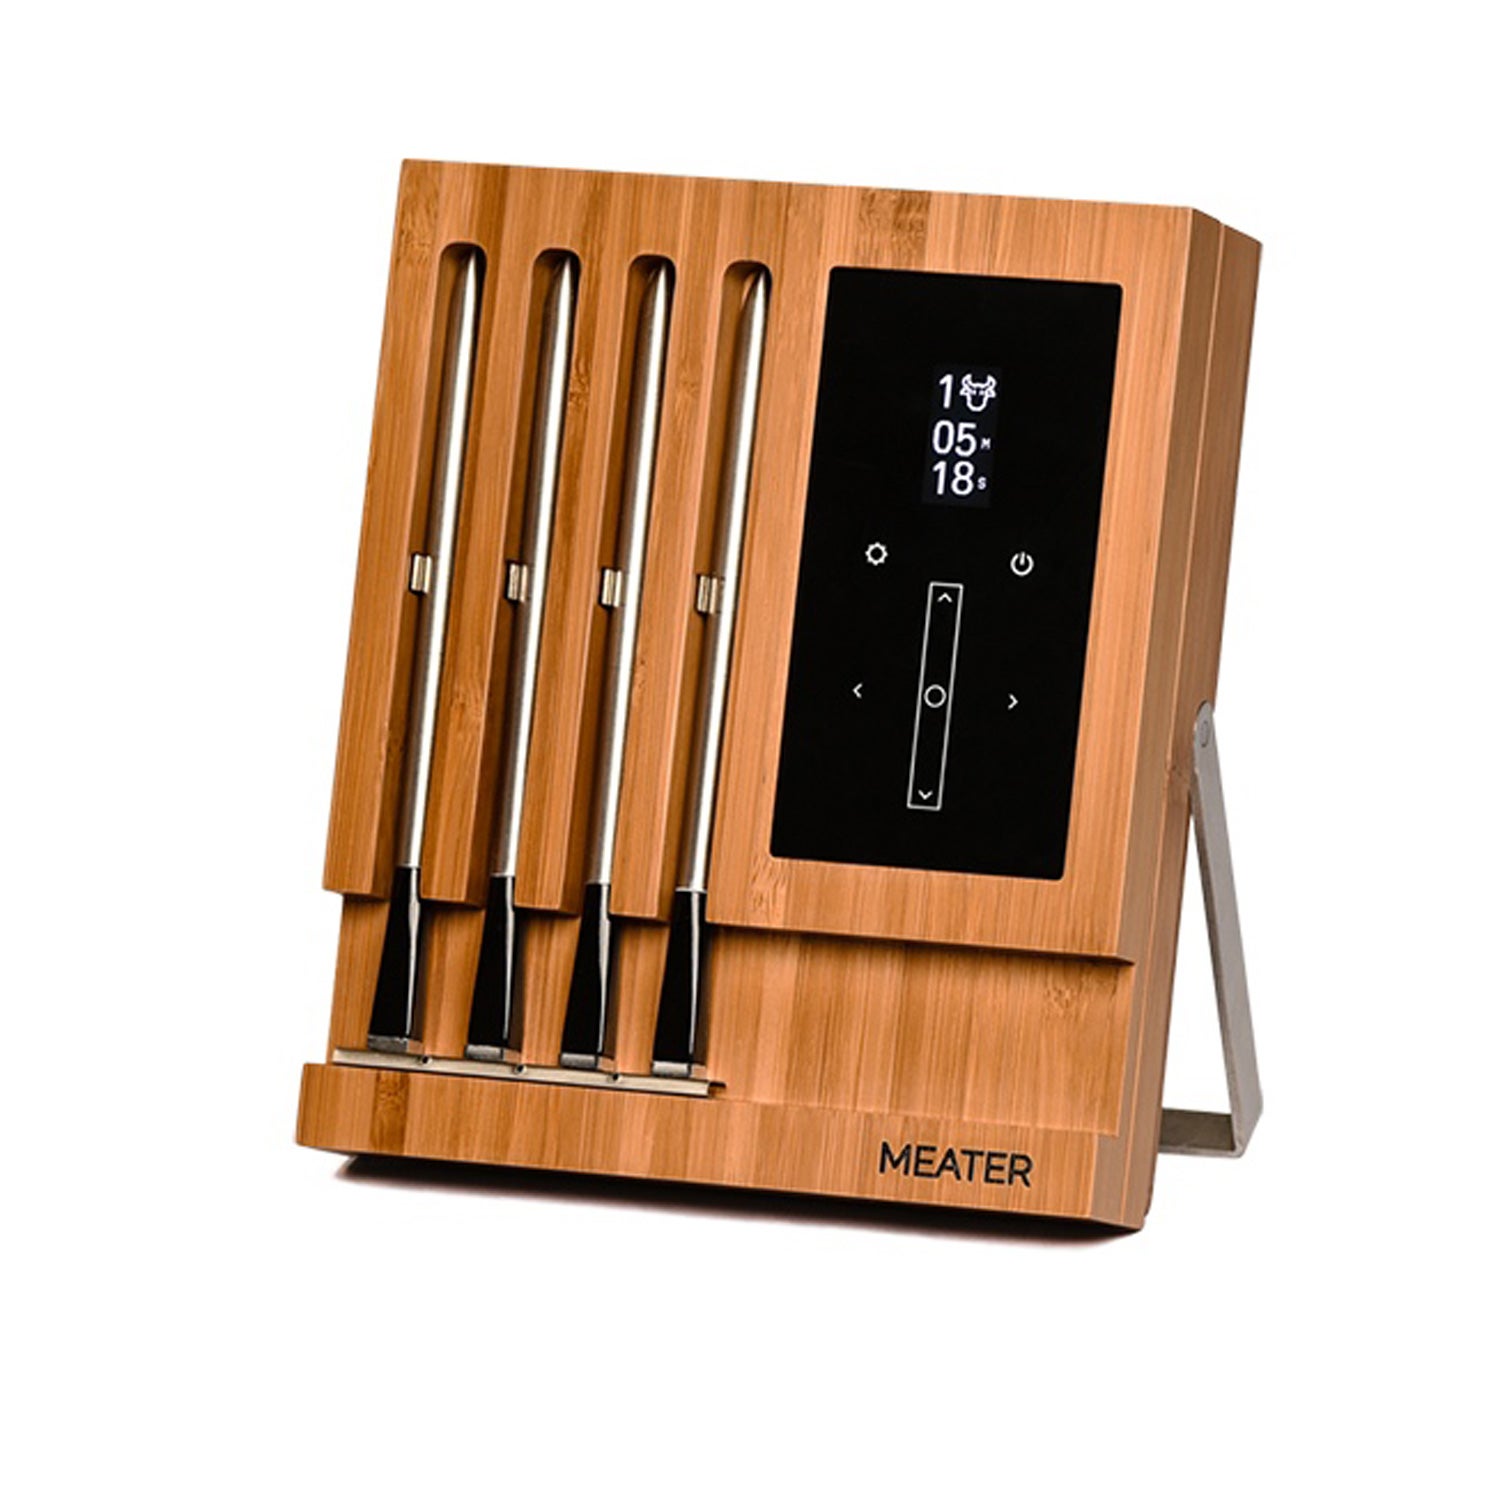 The Meater Wireless Thermometer